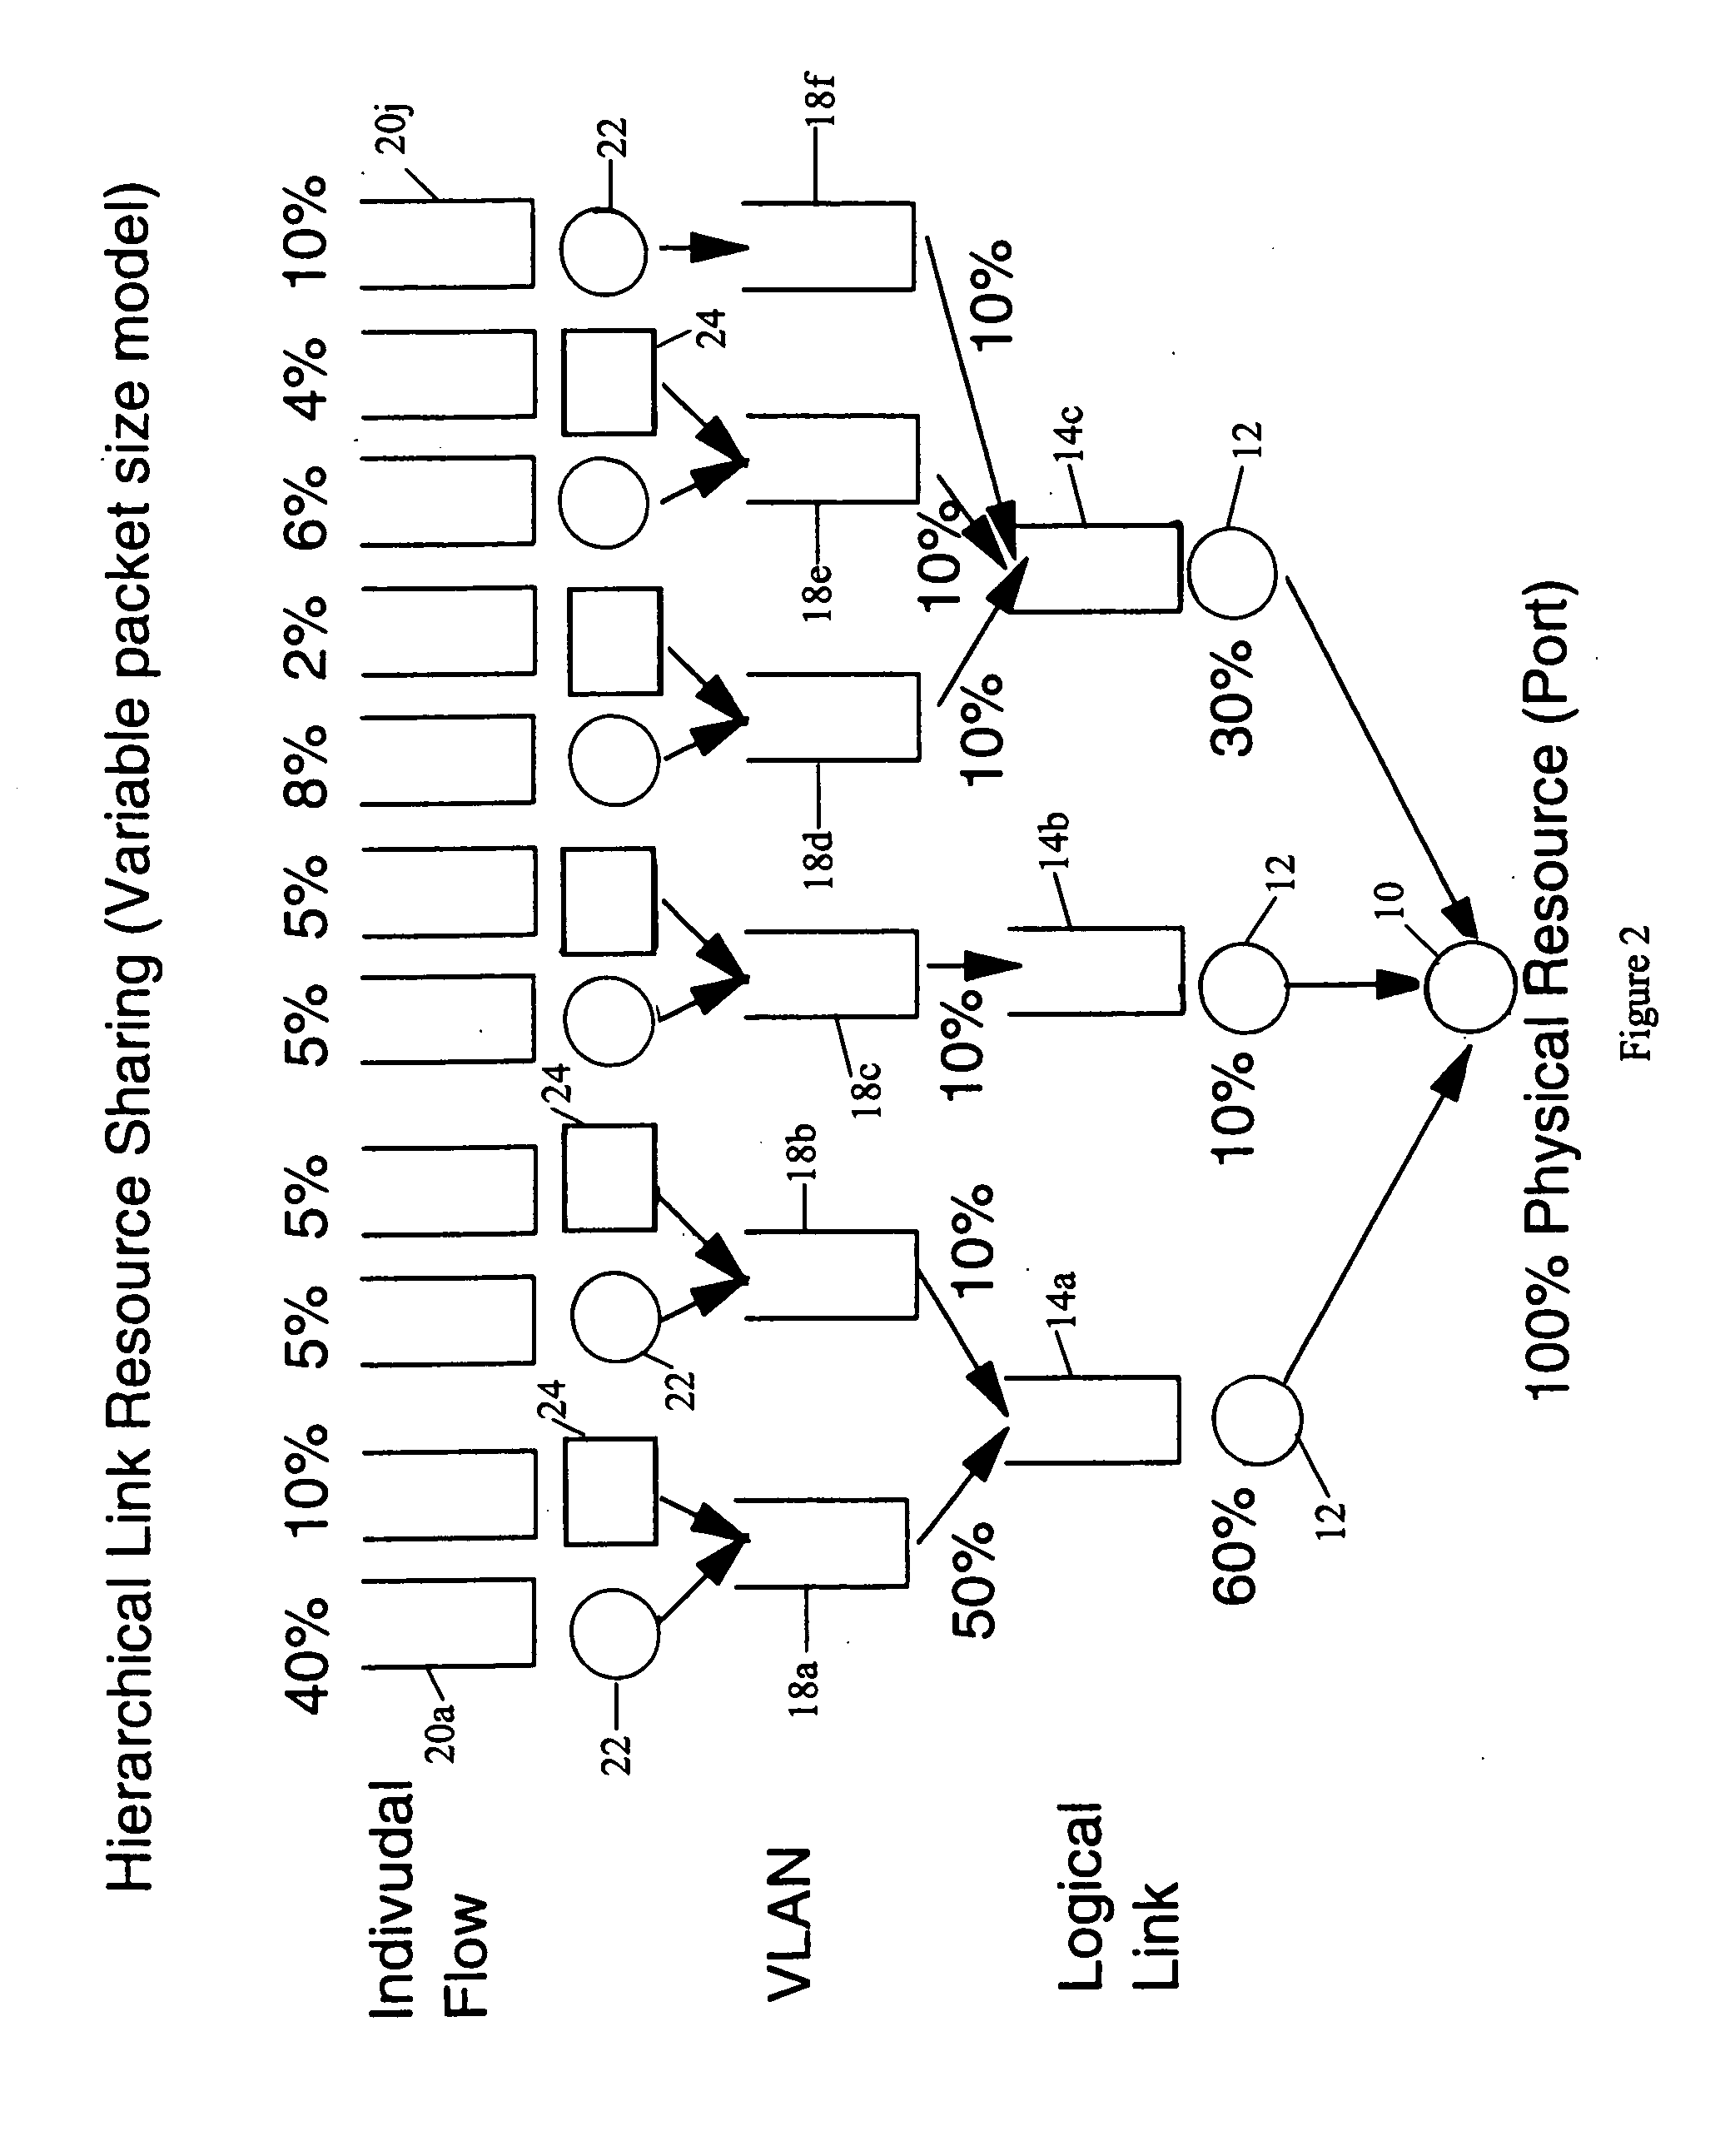 Structure and method for scheduler pipeline design for hierarchical link sharing